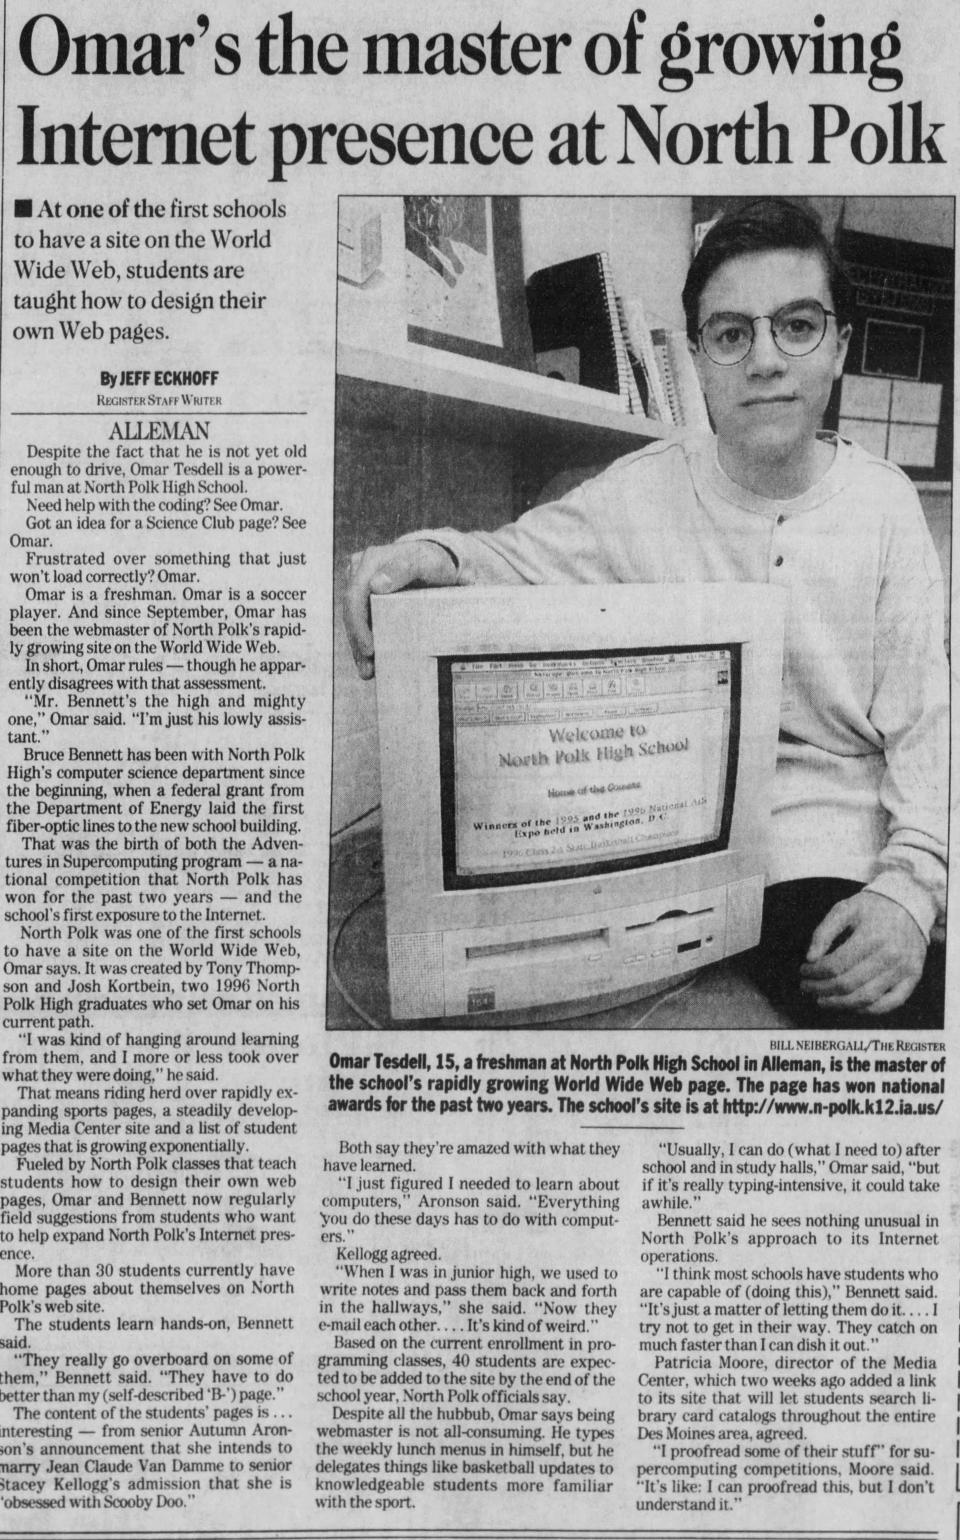 A 1997 Des Moines Register article features North Polk's flourishing website and computer program.